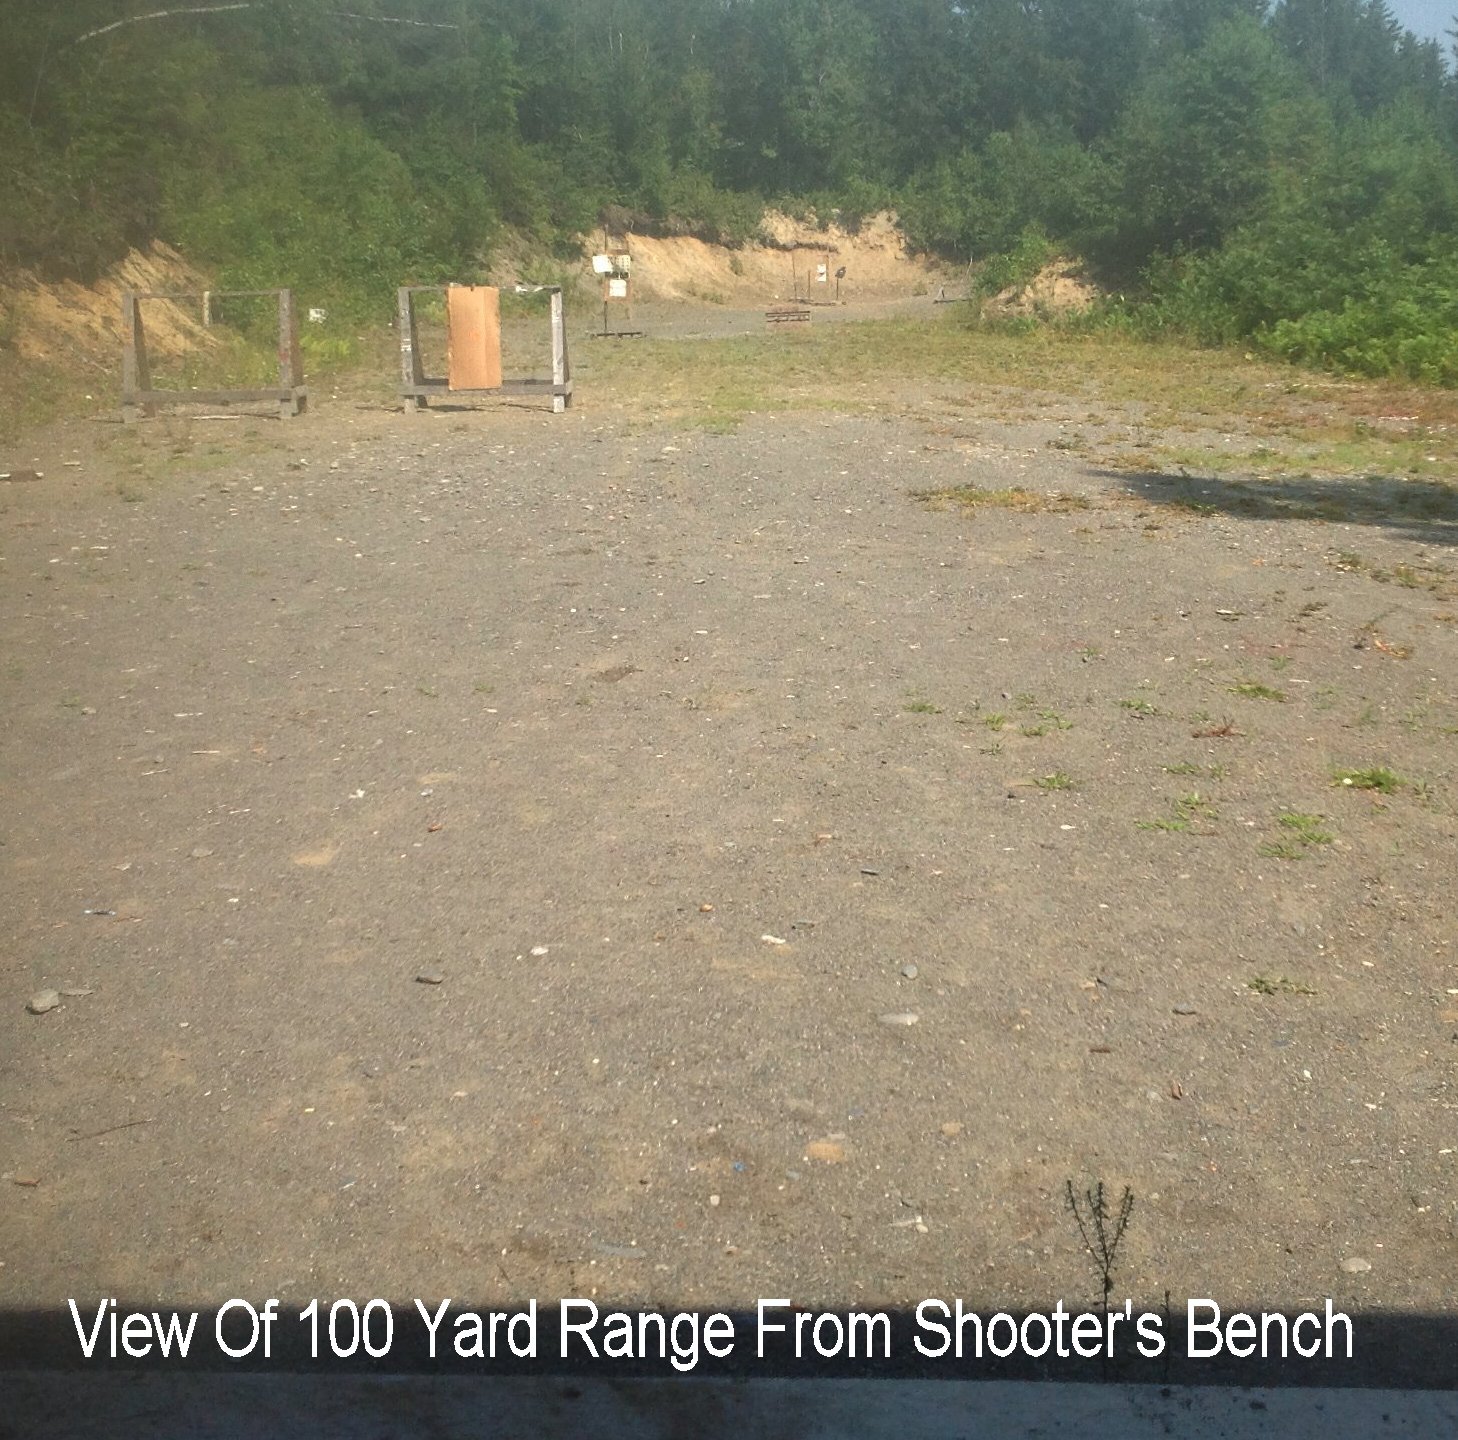 100 Yard Range from Shooter's Bench Looking Down Range